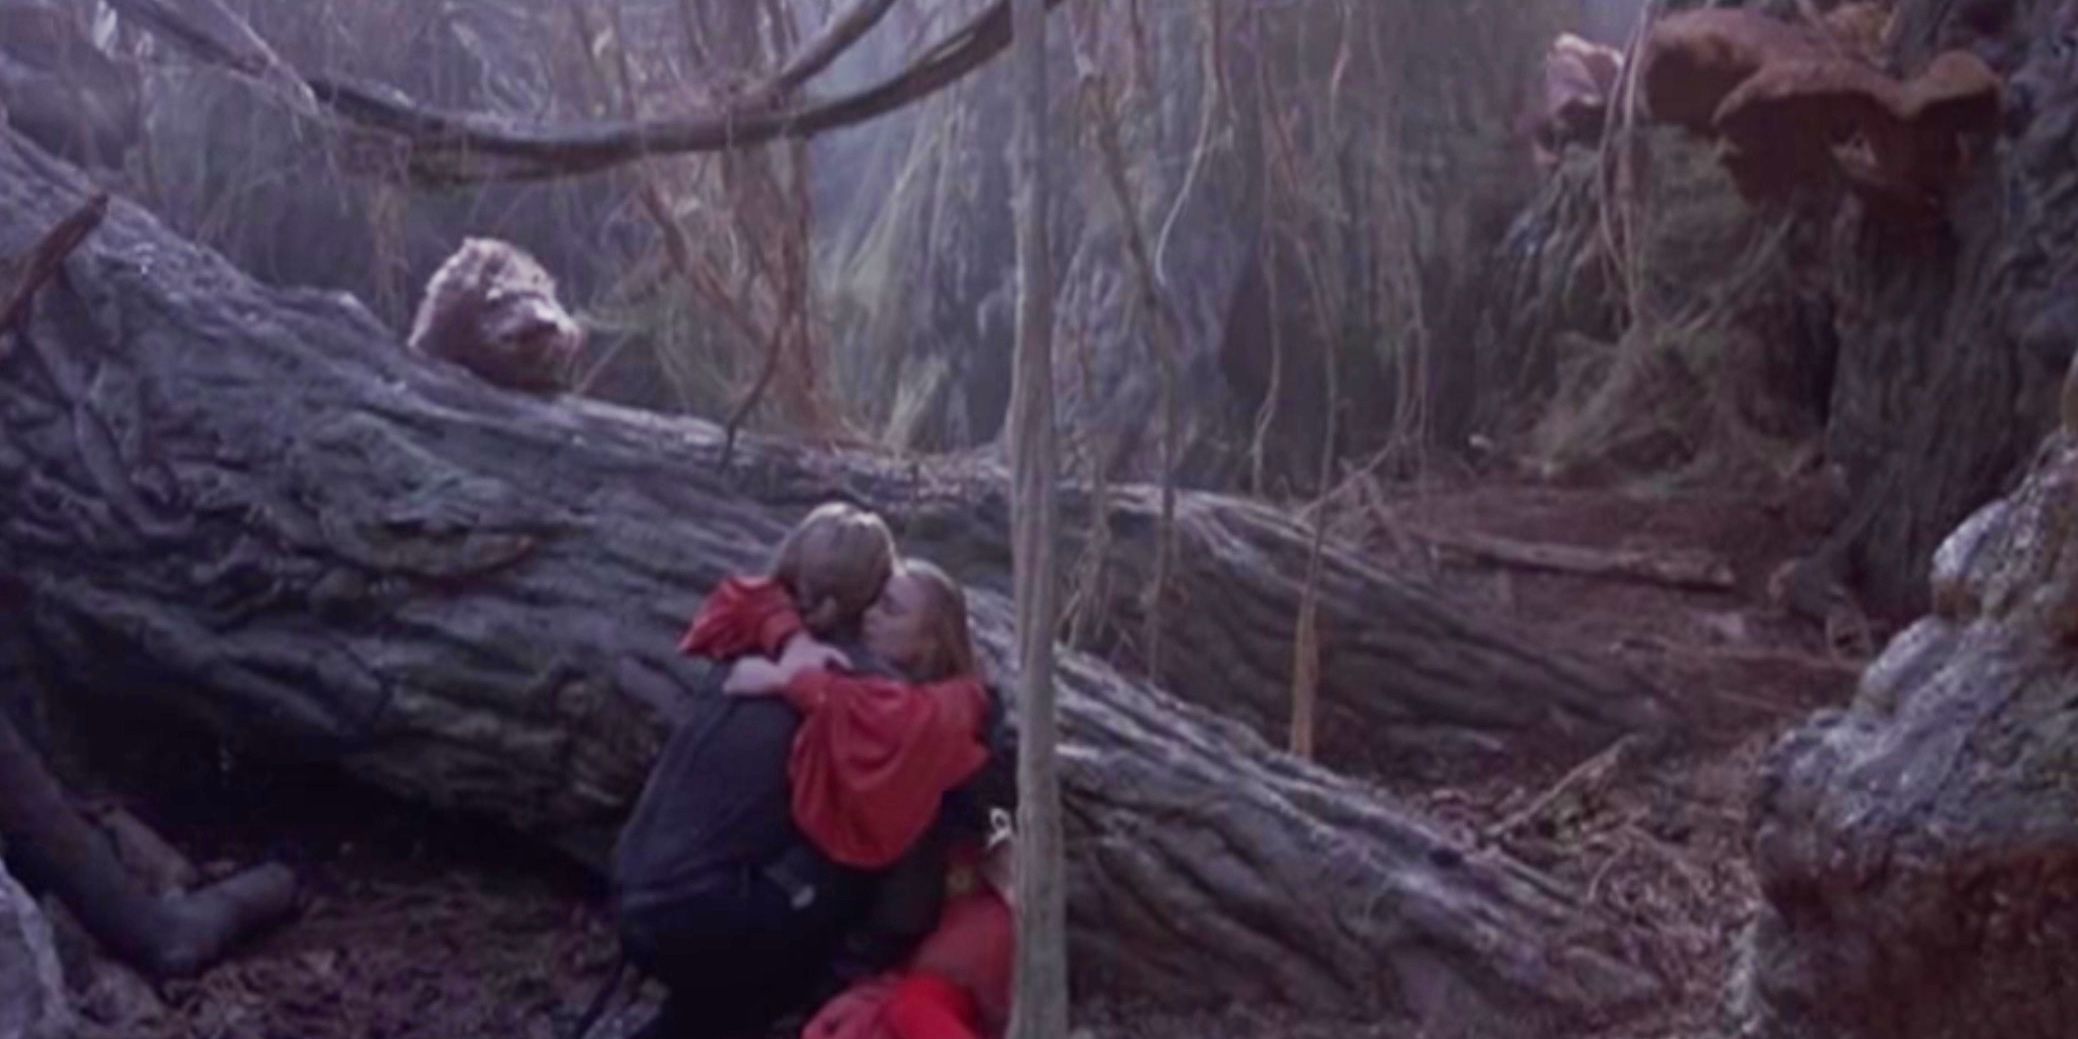 The Fire Swamp in The Princess Bride